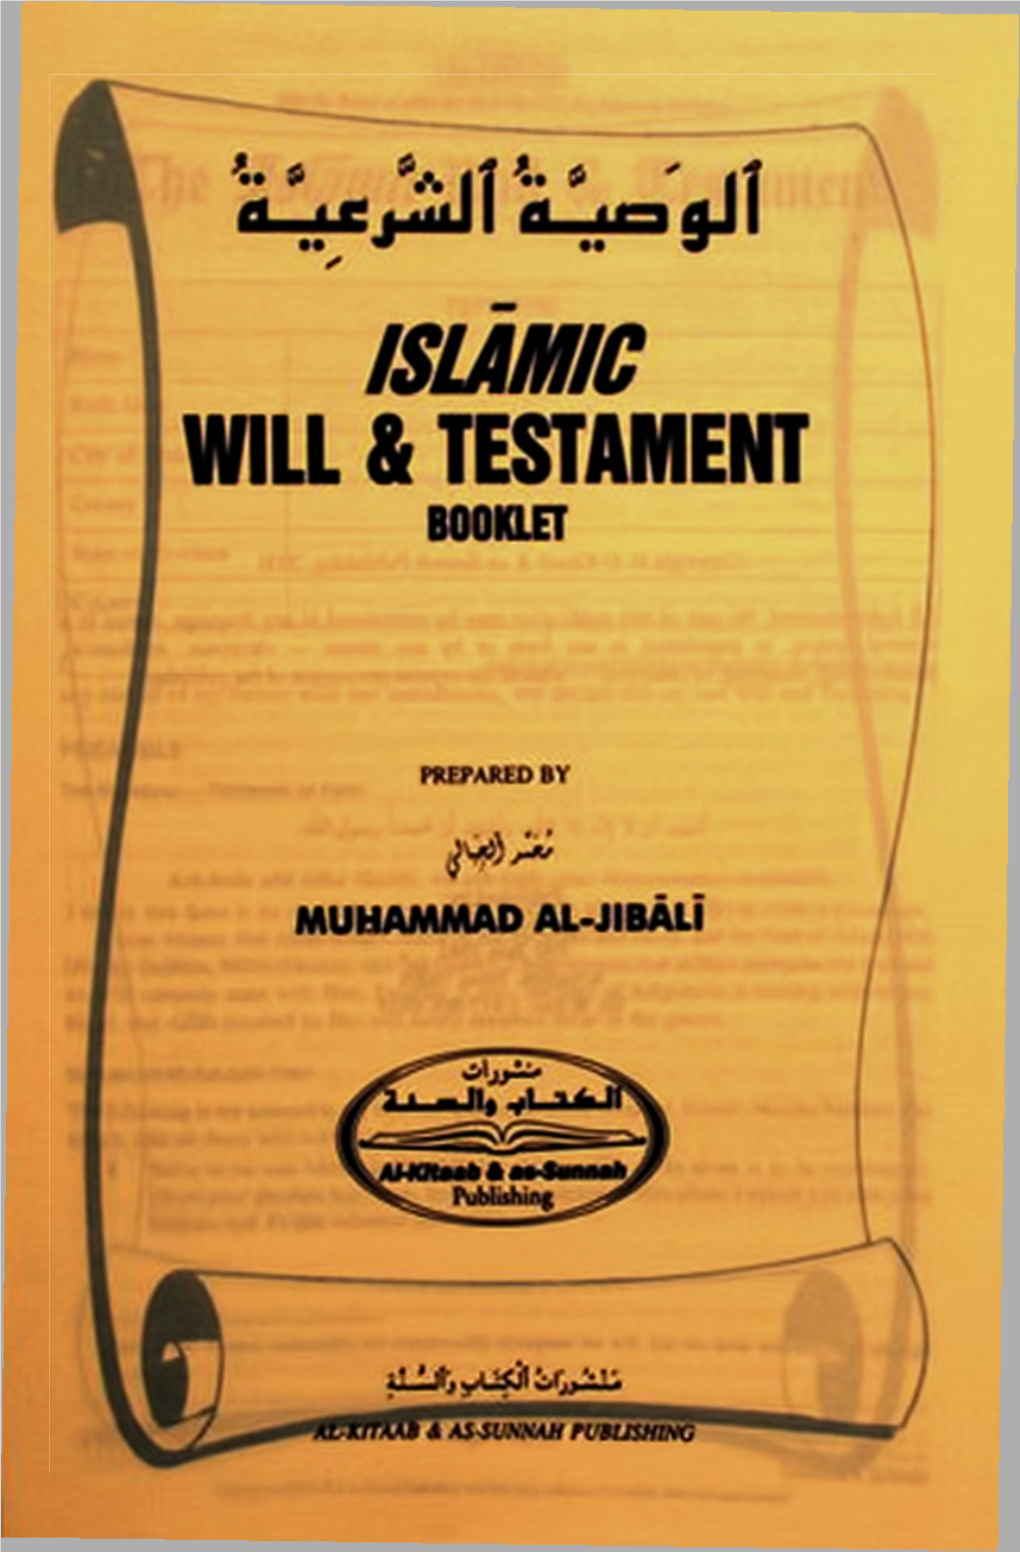 The Islamic Will and Testament”, Was Published in 1995, in a Rudimentary Form, and Not As Part of This Series